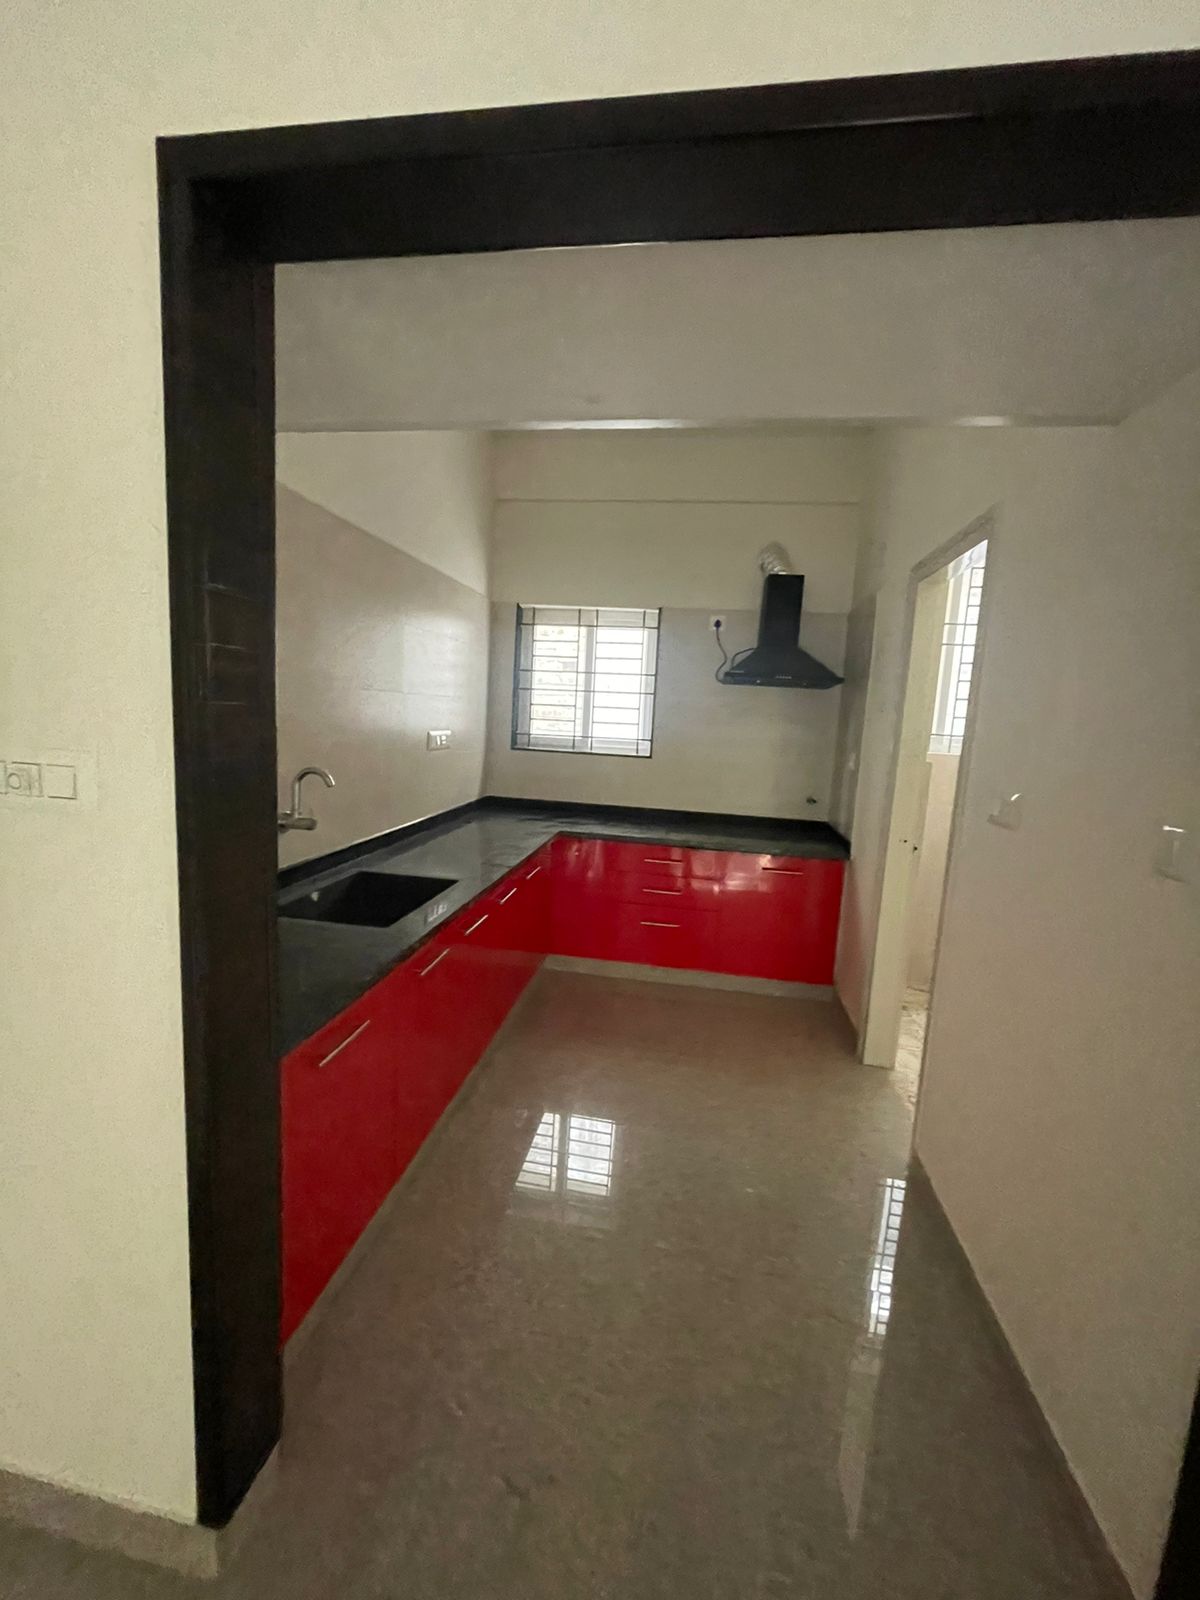 2 BHK Independent House for Lease Only at JAML2 - 1957 in NRI Layout